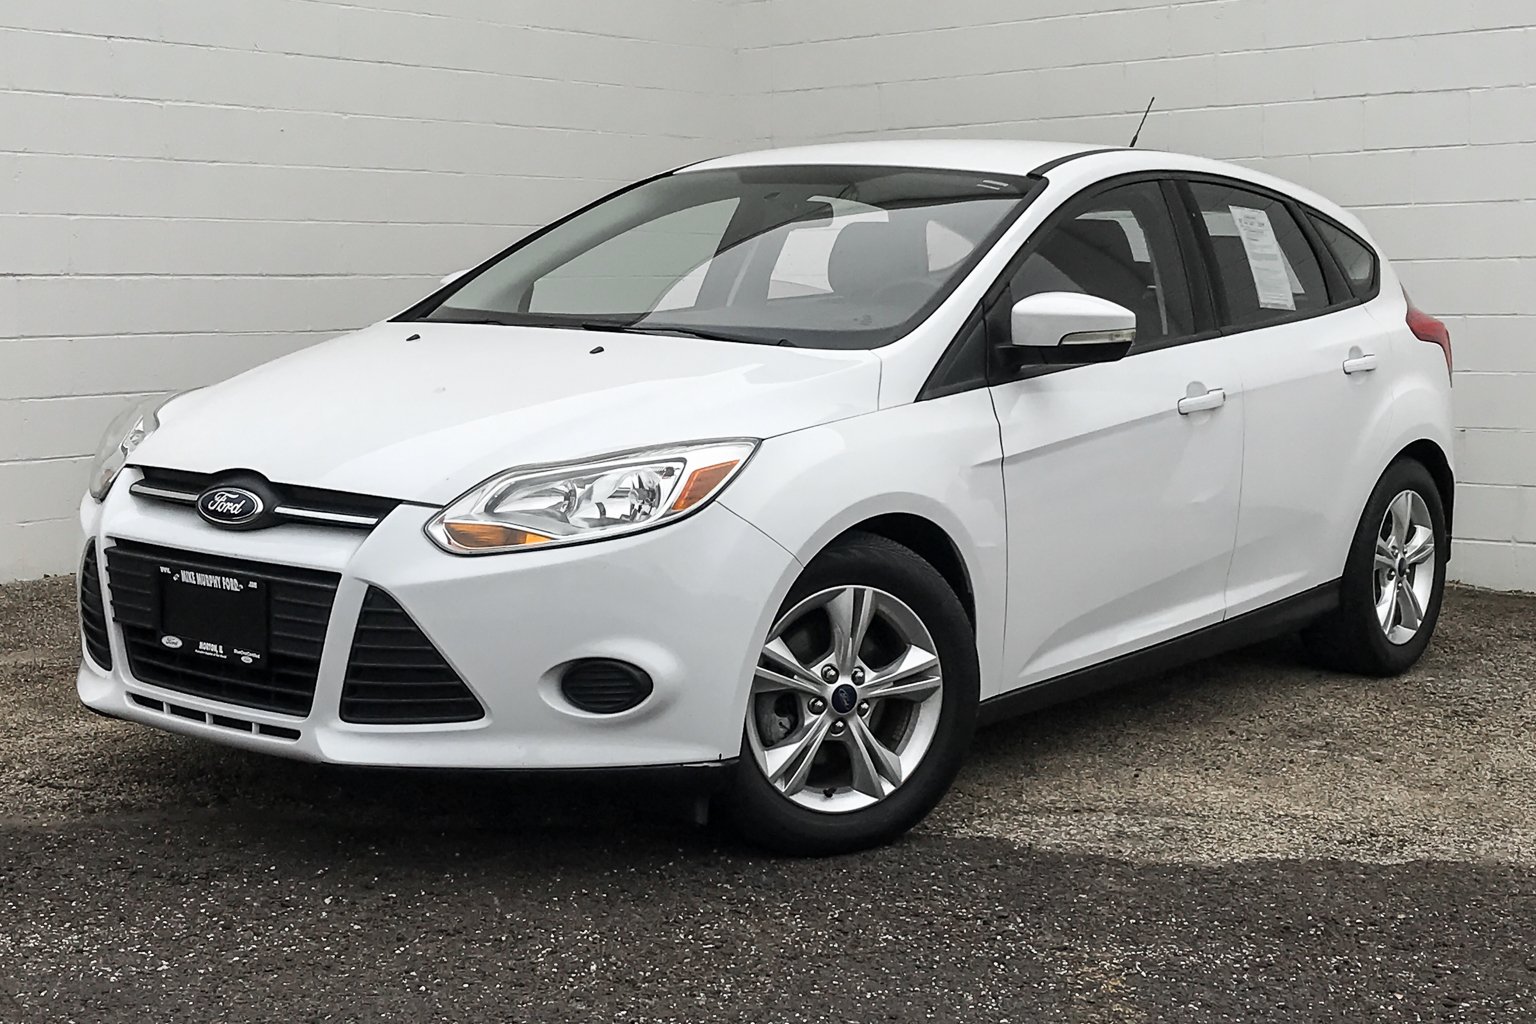 Pre-Owned 2014 Ford Focus SE Hatchback in Morton #210799 | Mike Murphy Ford